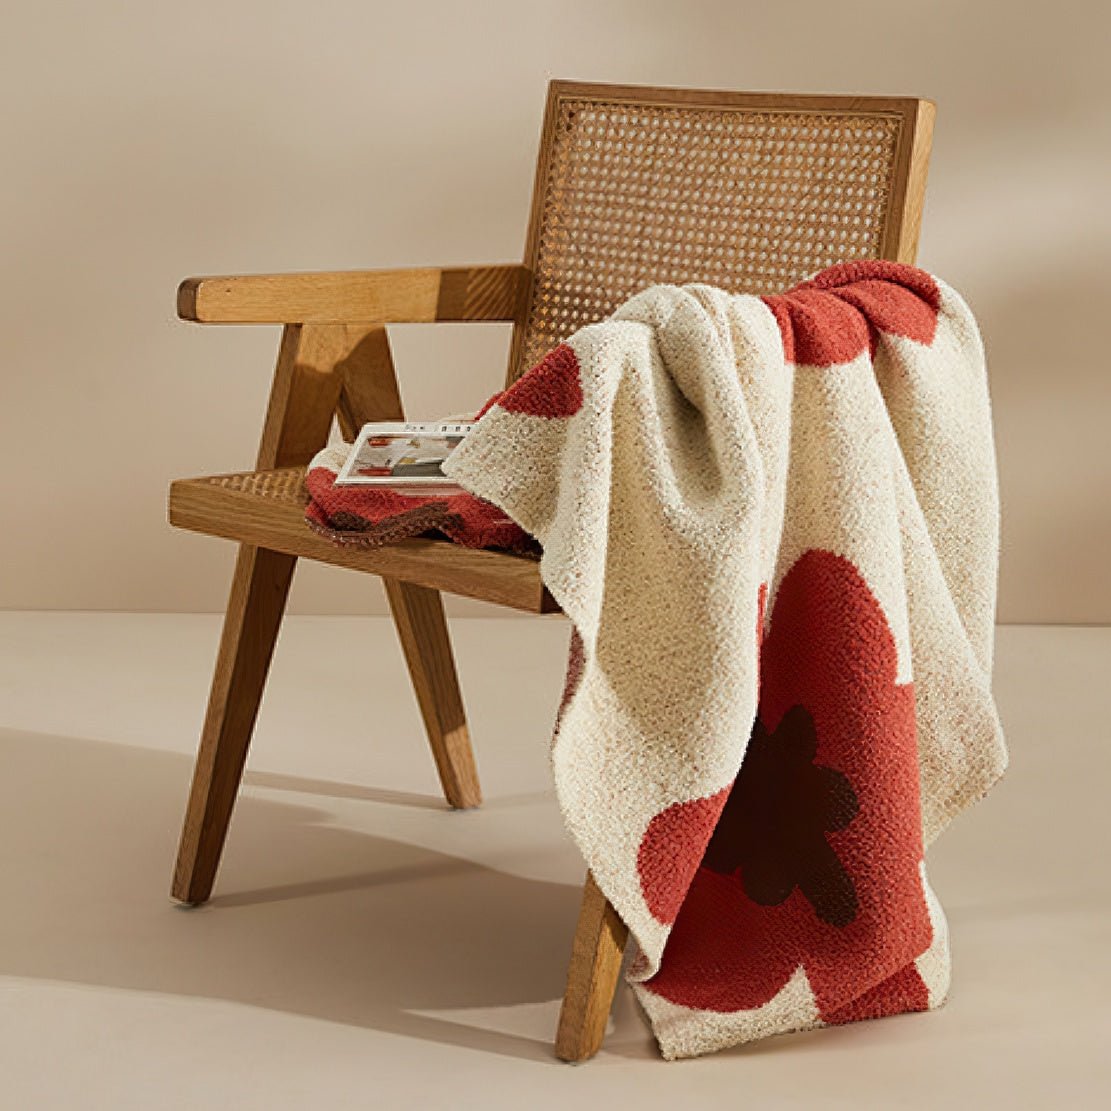 Wooden chair with white throw blanket with red floral pattern.